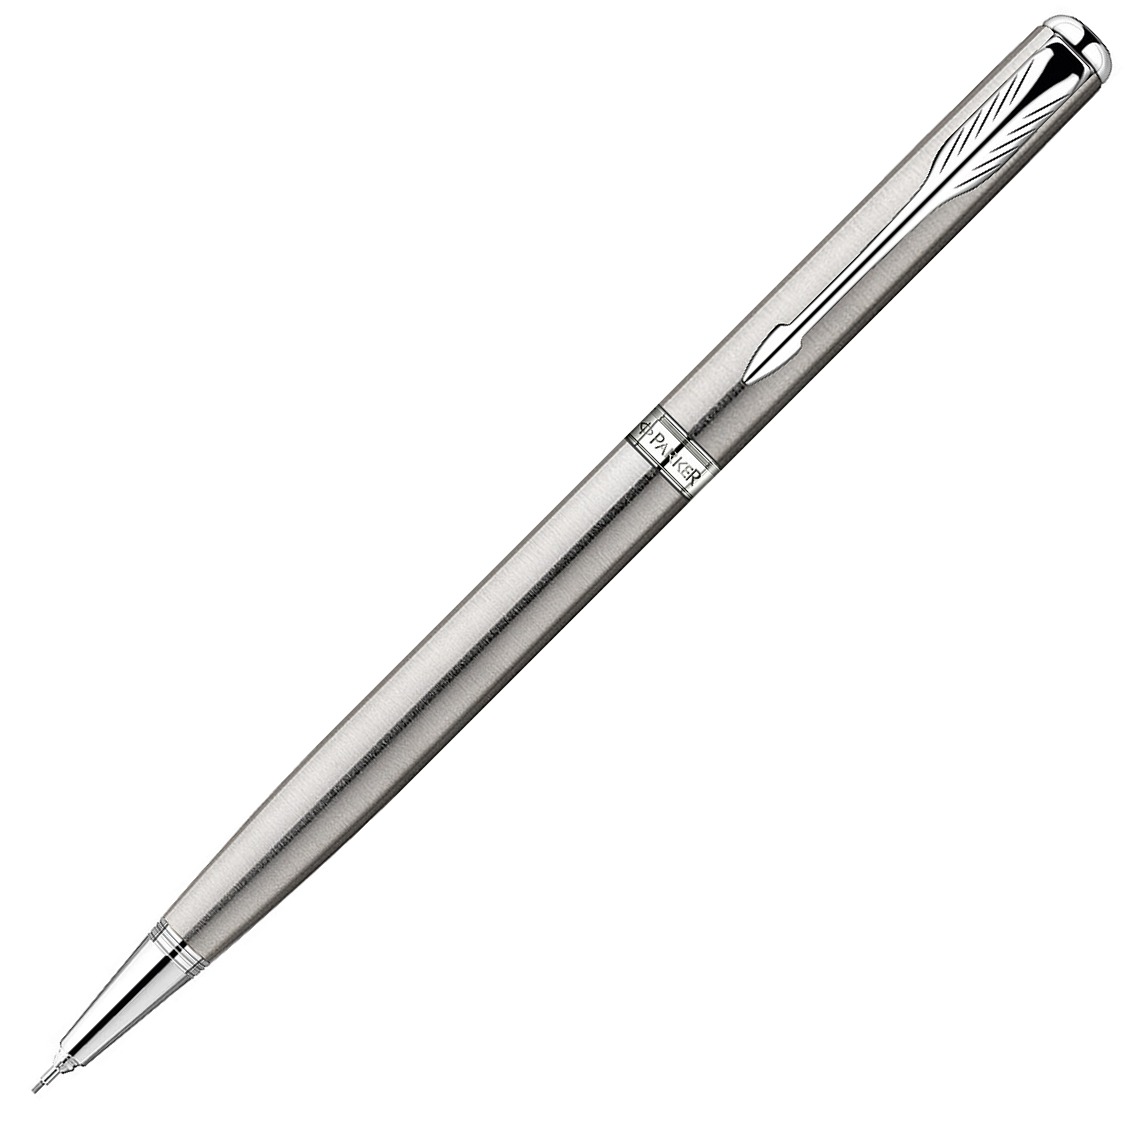 creion mecanic parker sonnet stainless steel ct title=creion mecanic parker sonnet stainless steel ct